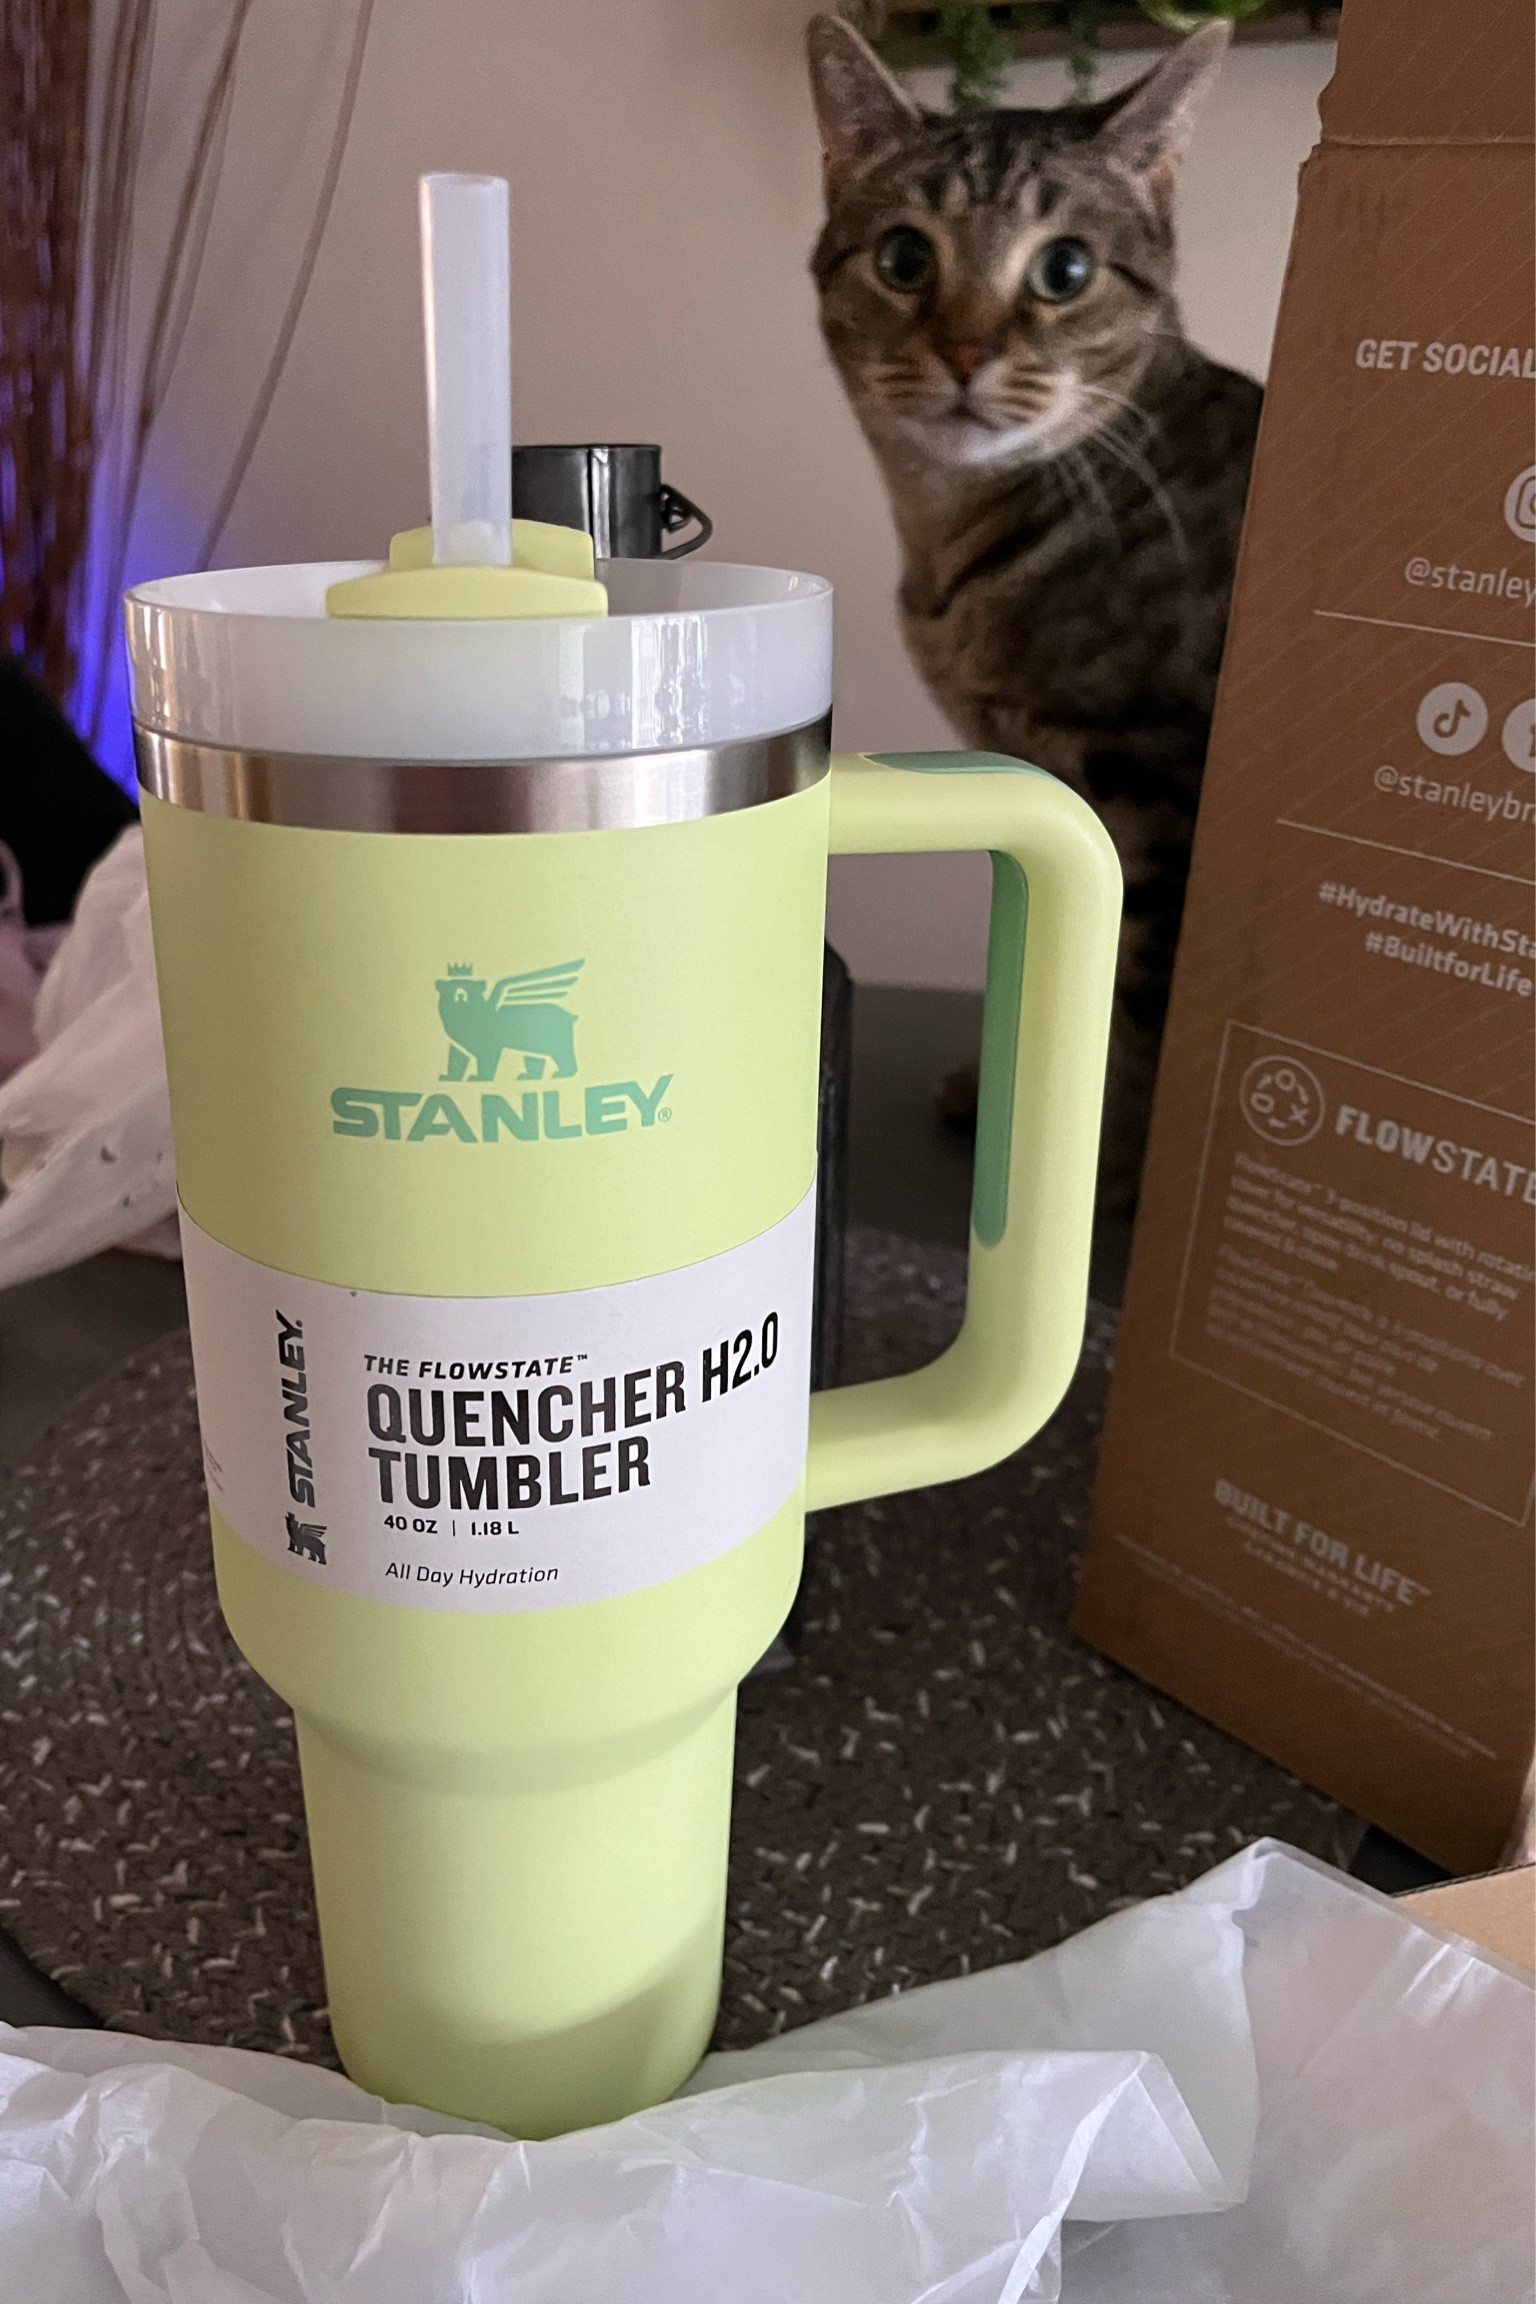 Stanley Quencher H2.0 FlowState … curated on LTK